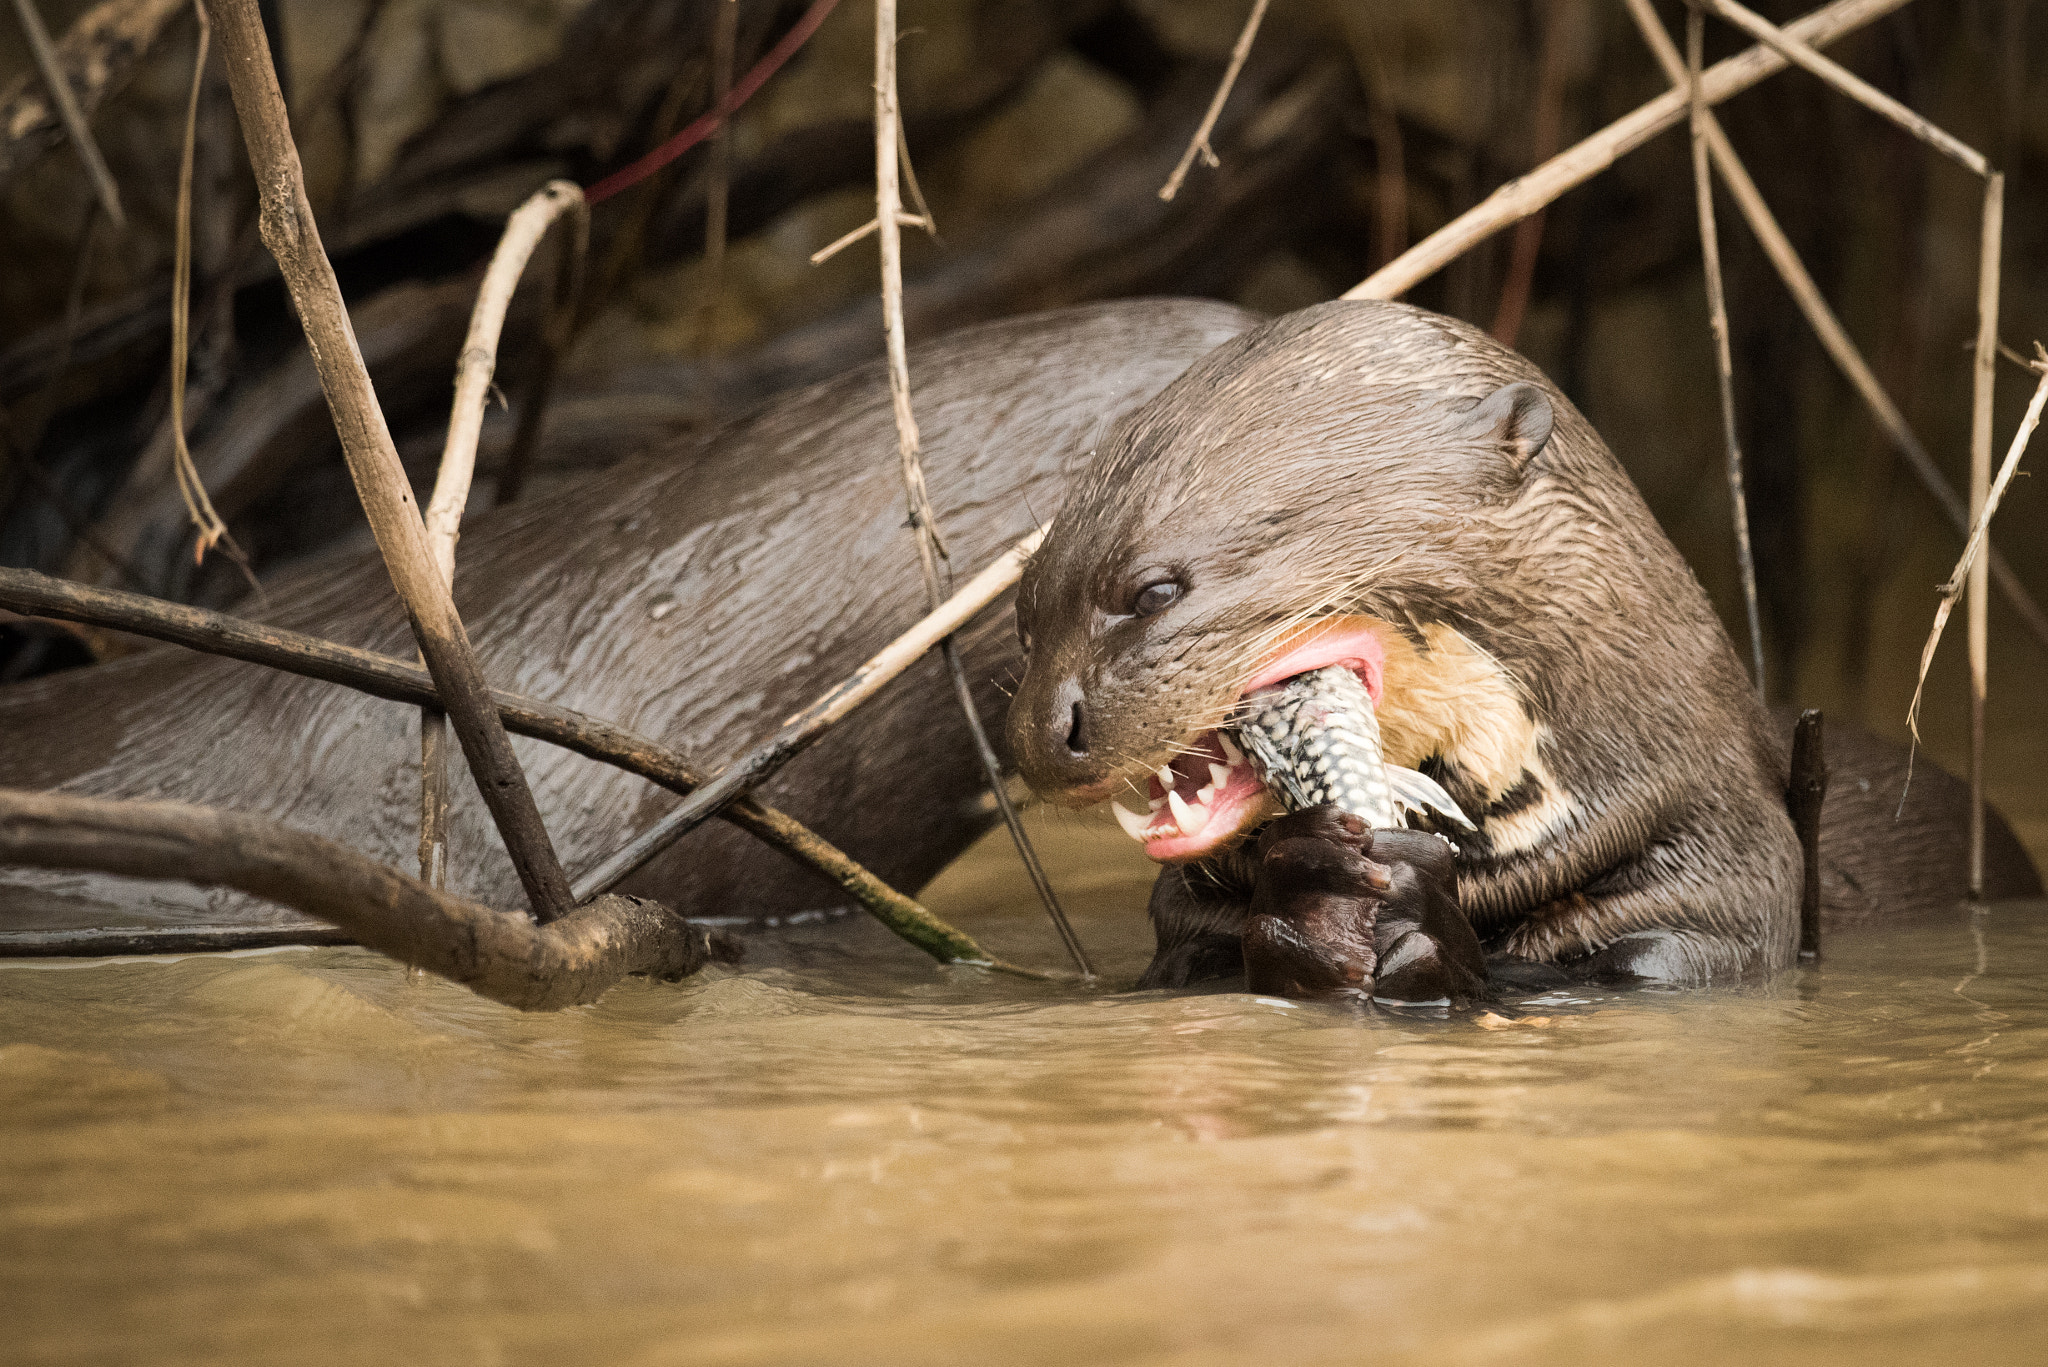 Nikon D810 sample photo. Giant river otter eating fish in reeds photography